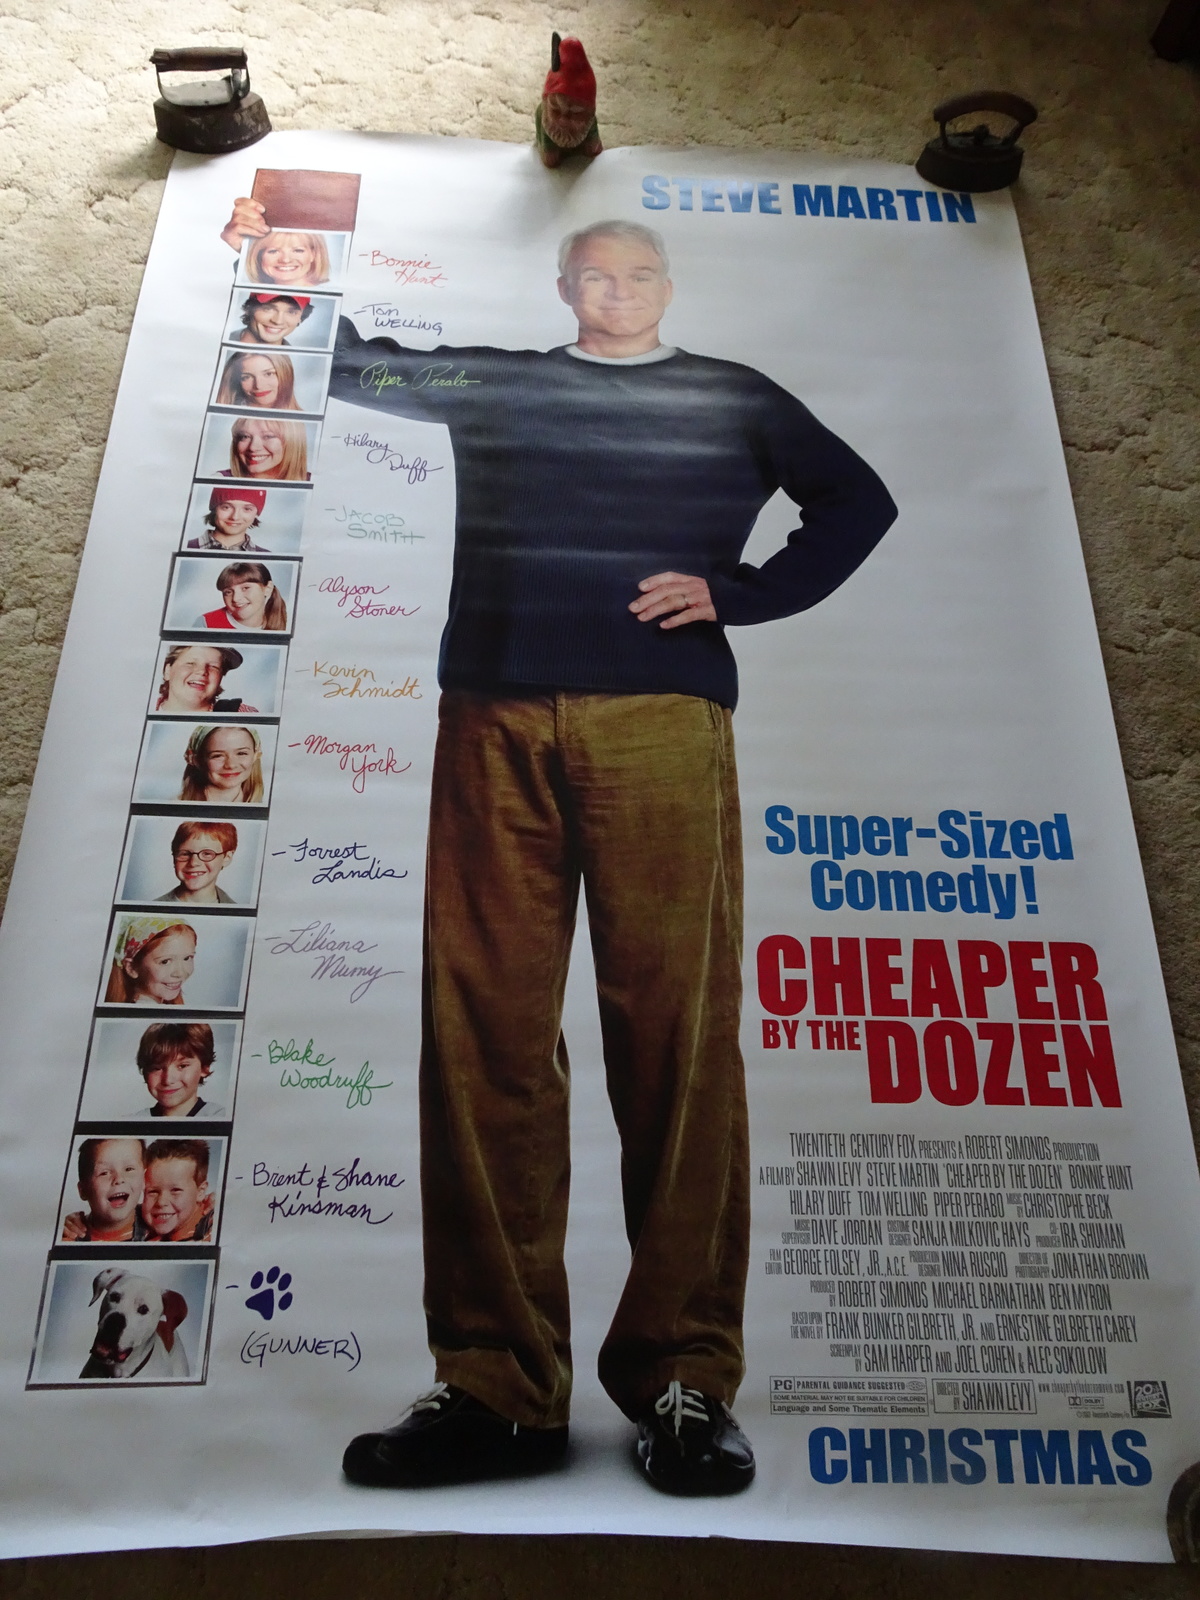 Primary image for CHEAPER BY THE DOZEN - MOVIE BANNER WITH STEVE MARTIN